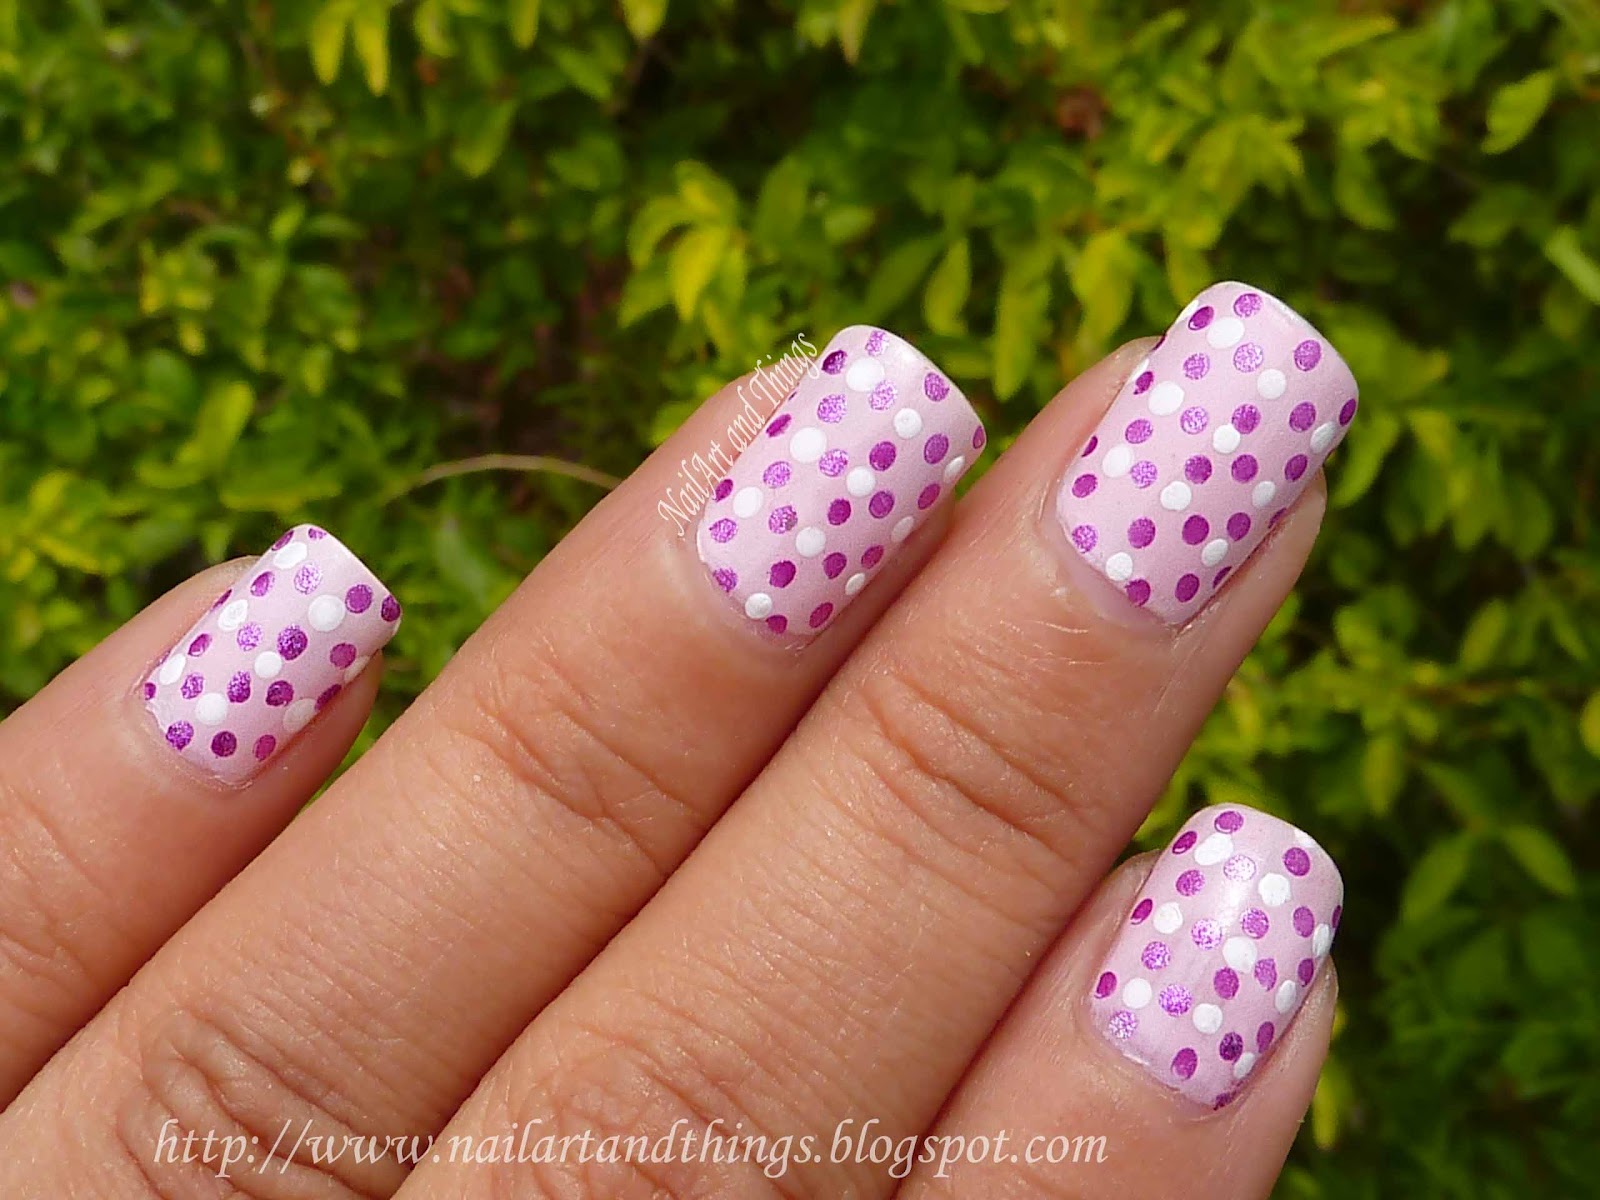 5. French Tip Nail Art Design Using Dotting Tools - wide 4